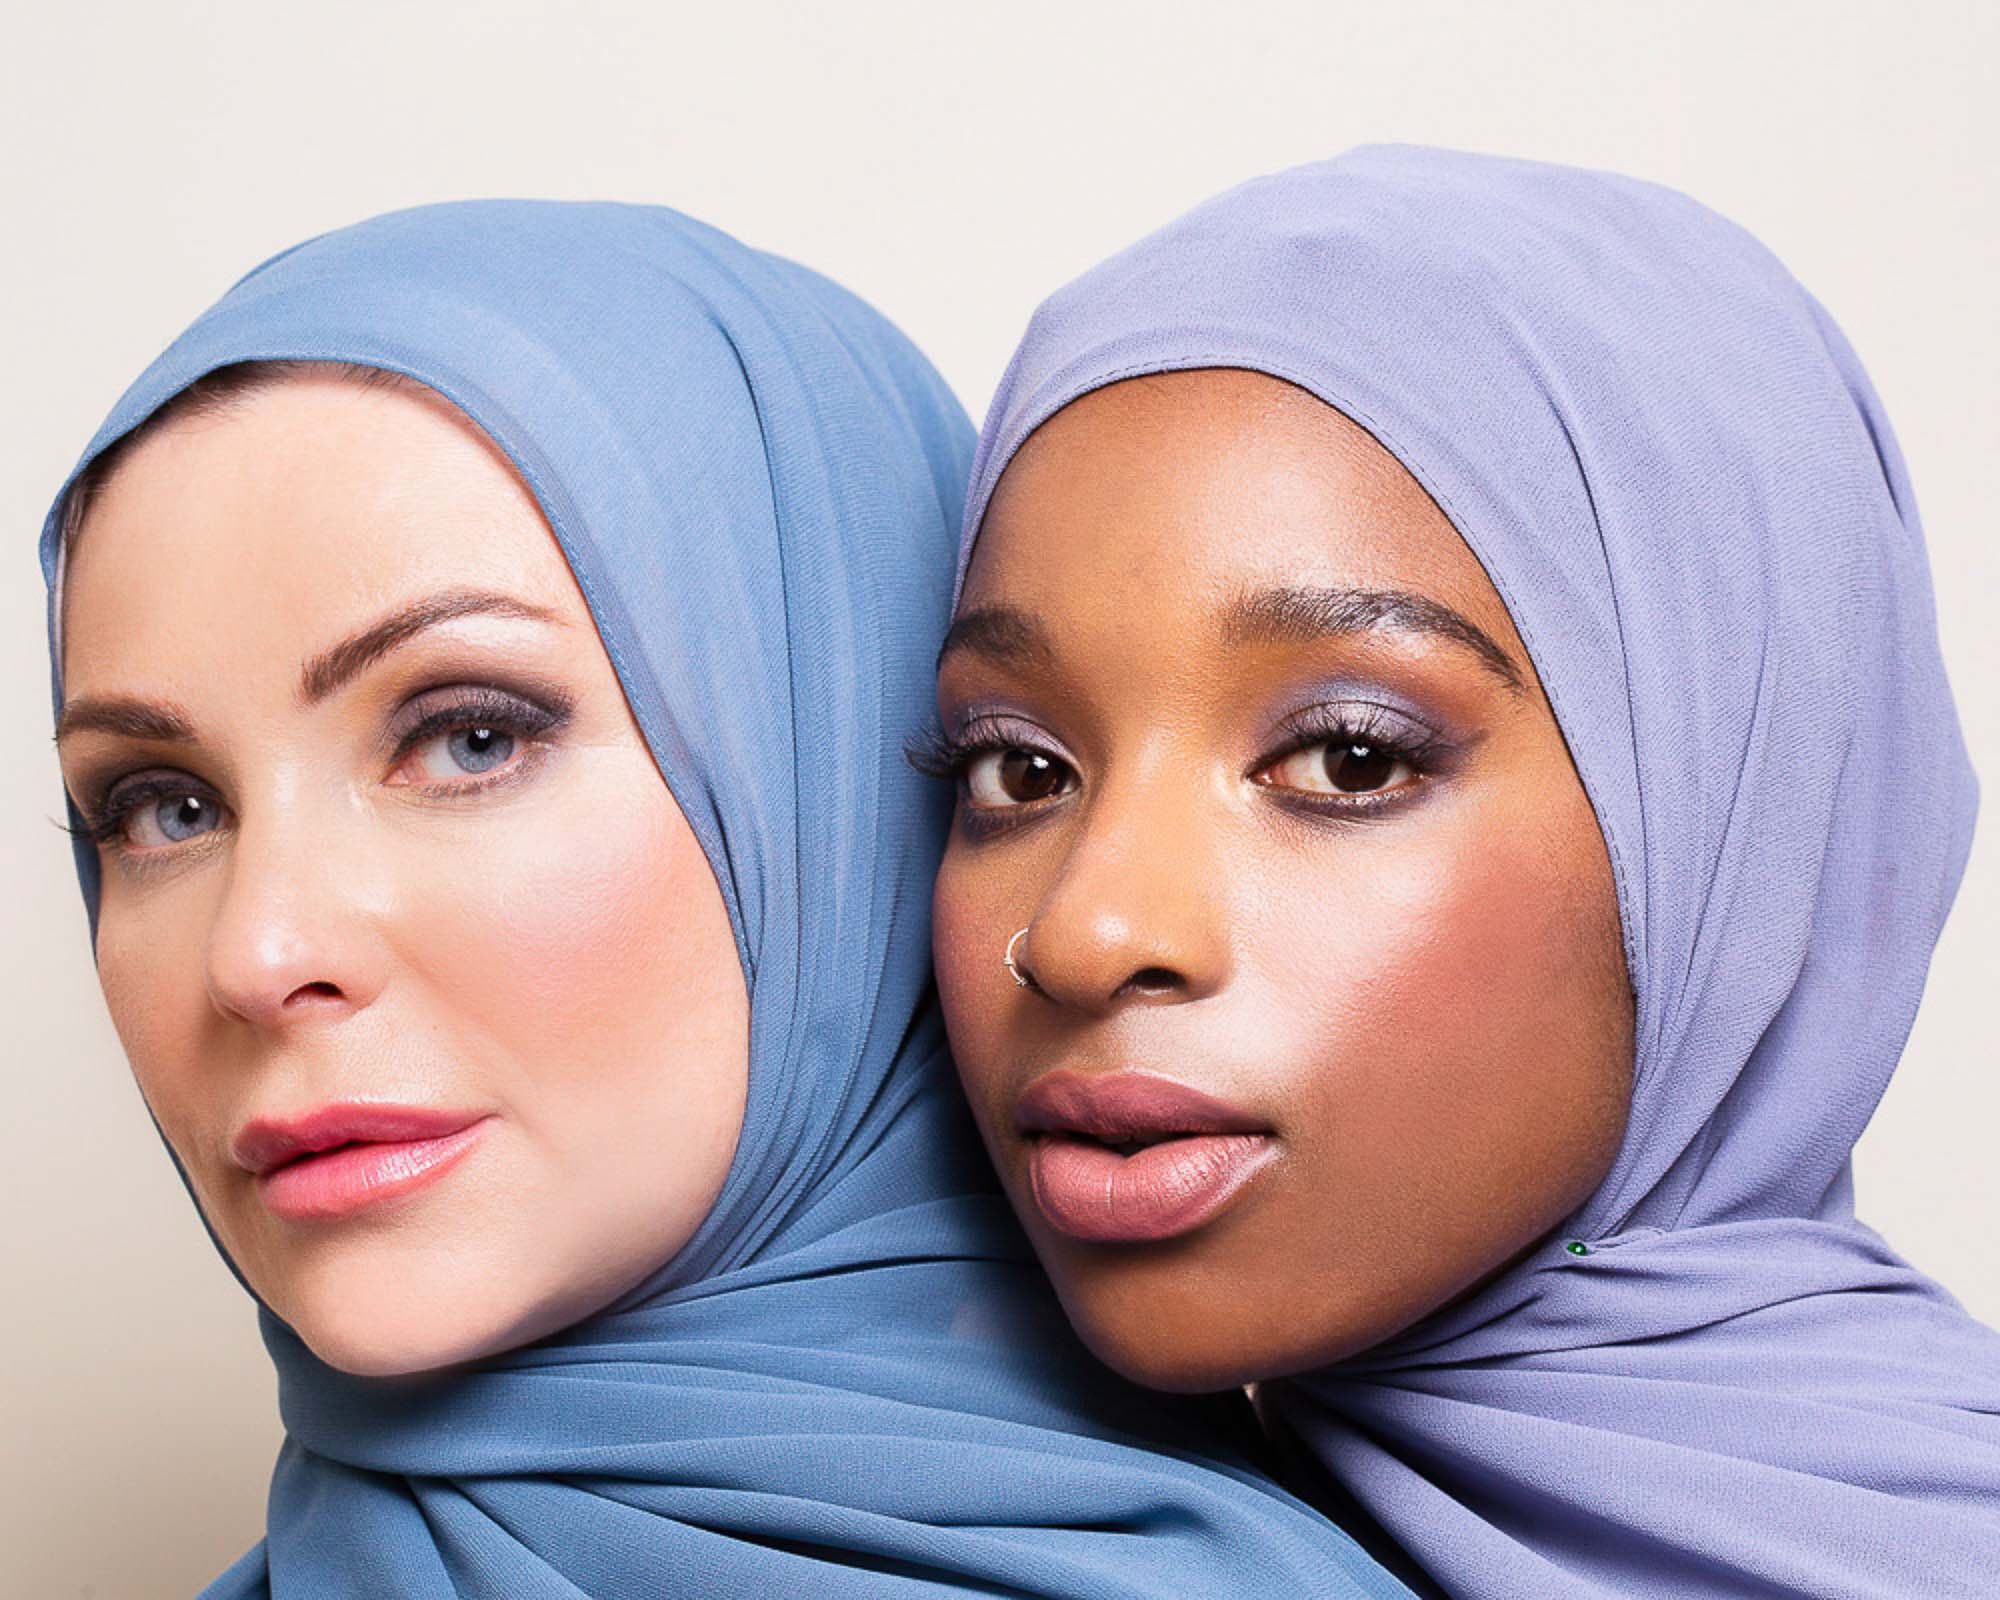 Girls in Hijabs Highlighting natural skin texture and expressions in beauty photography portraits by sku studio